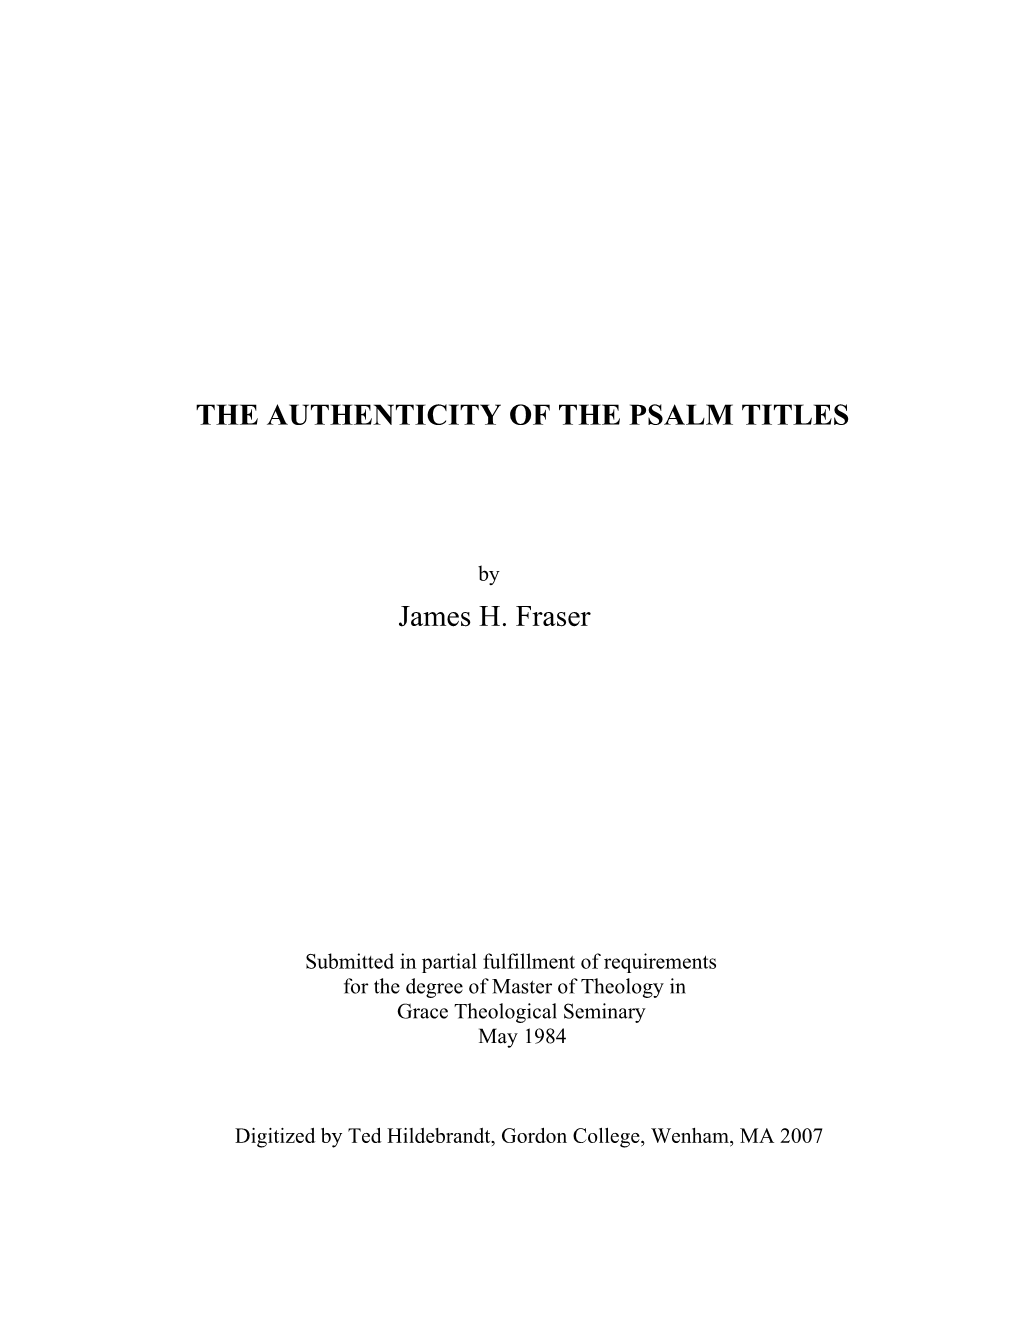 The Authenticity of the Psalm Titles